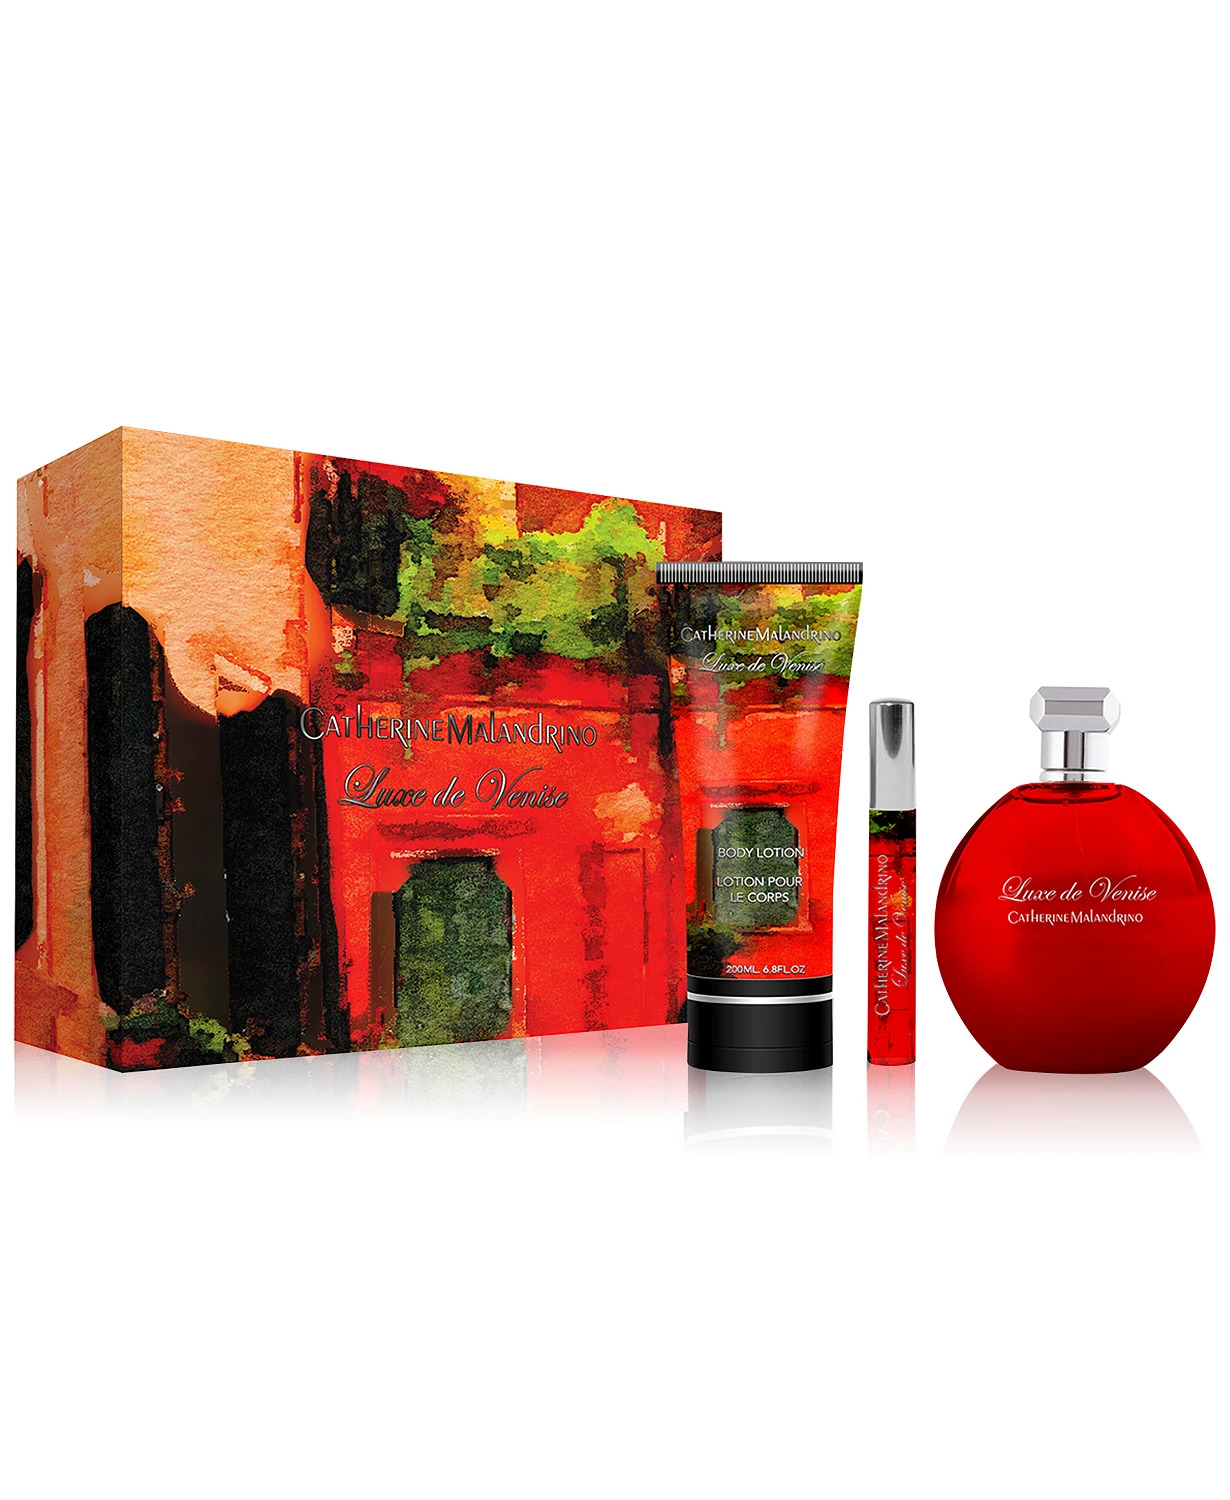 Perfume Gift Sets:3-Pc Catherine Malandrino Luxe de Venise Gift Set & More $25 Each + Free Shipping or Store Pickup at Macys